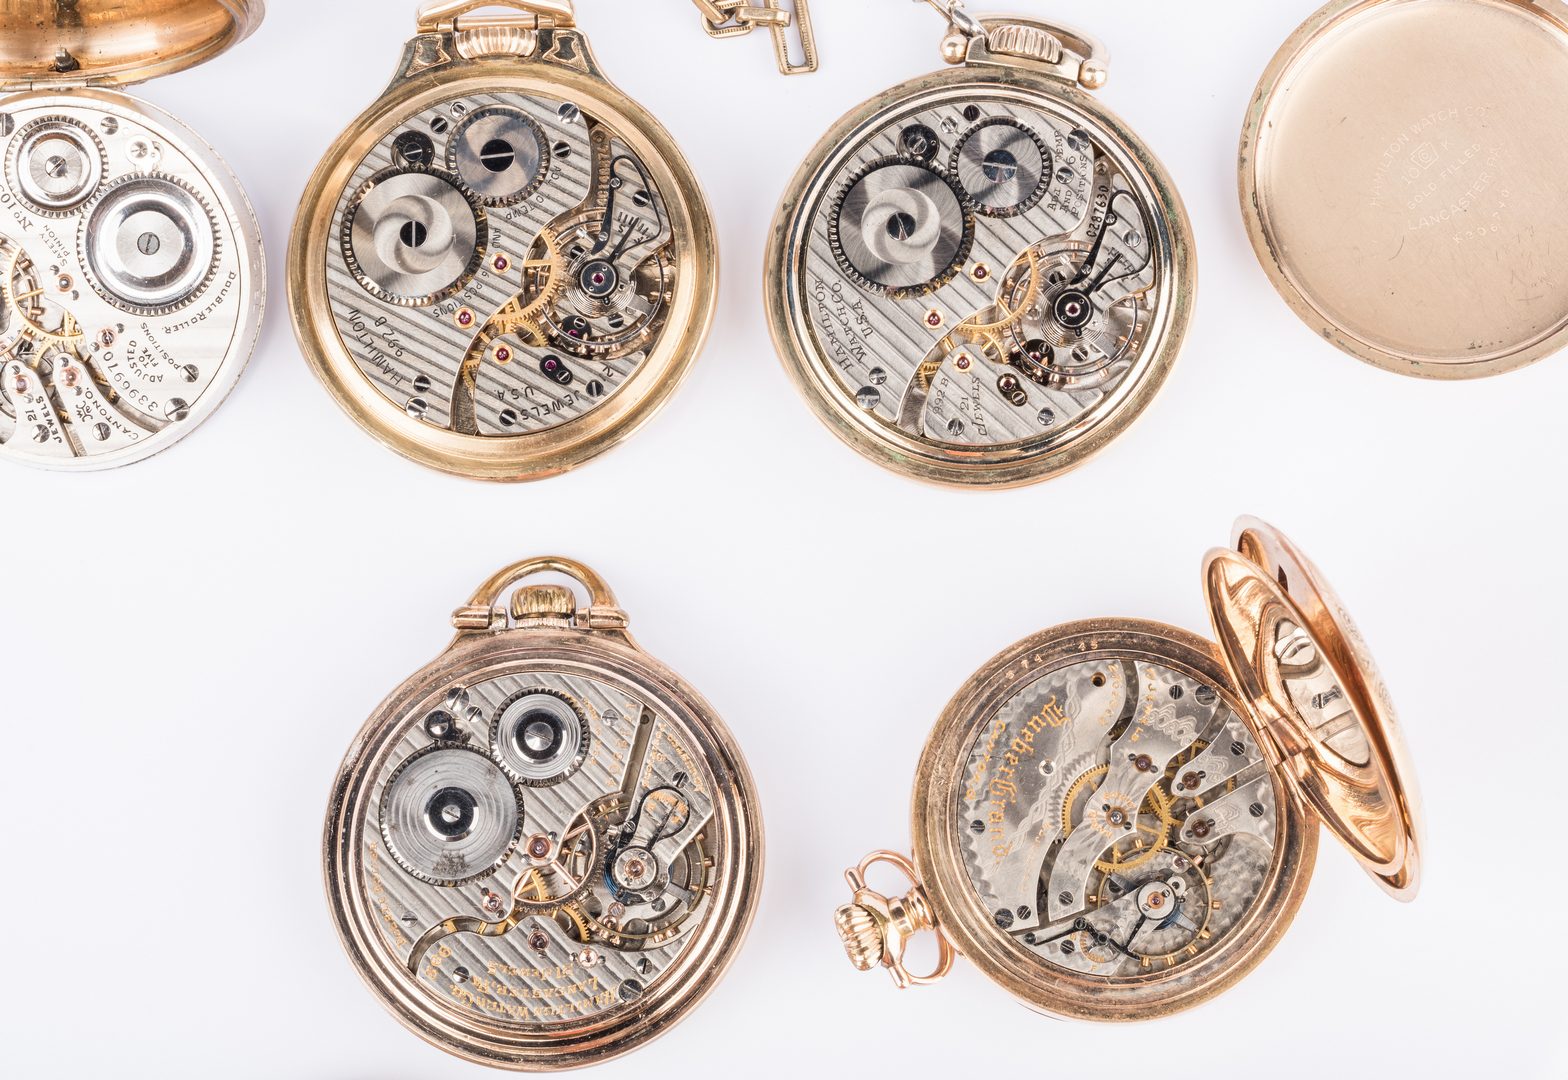 Lot 854: Group 6 Railway Pocket Watches plus 1 (7 total)